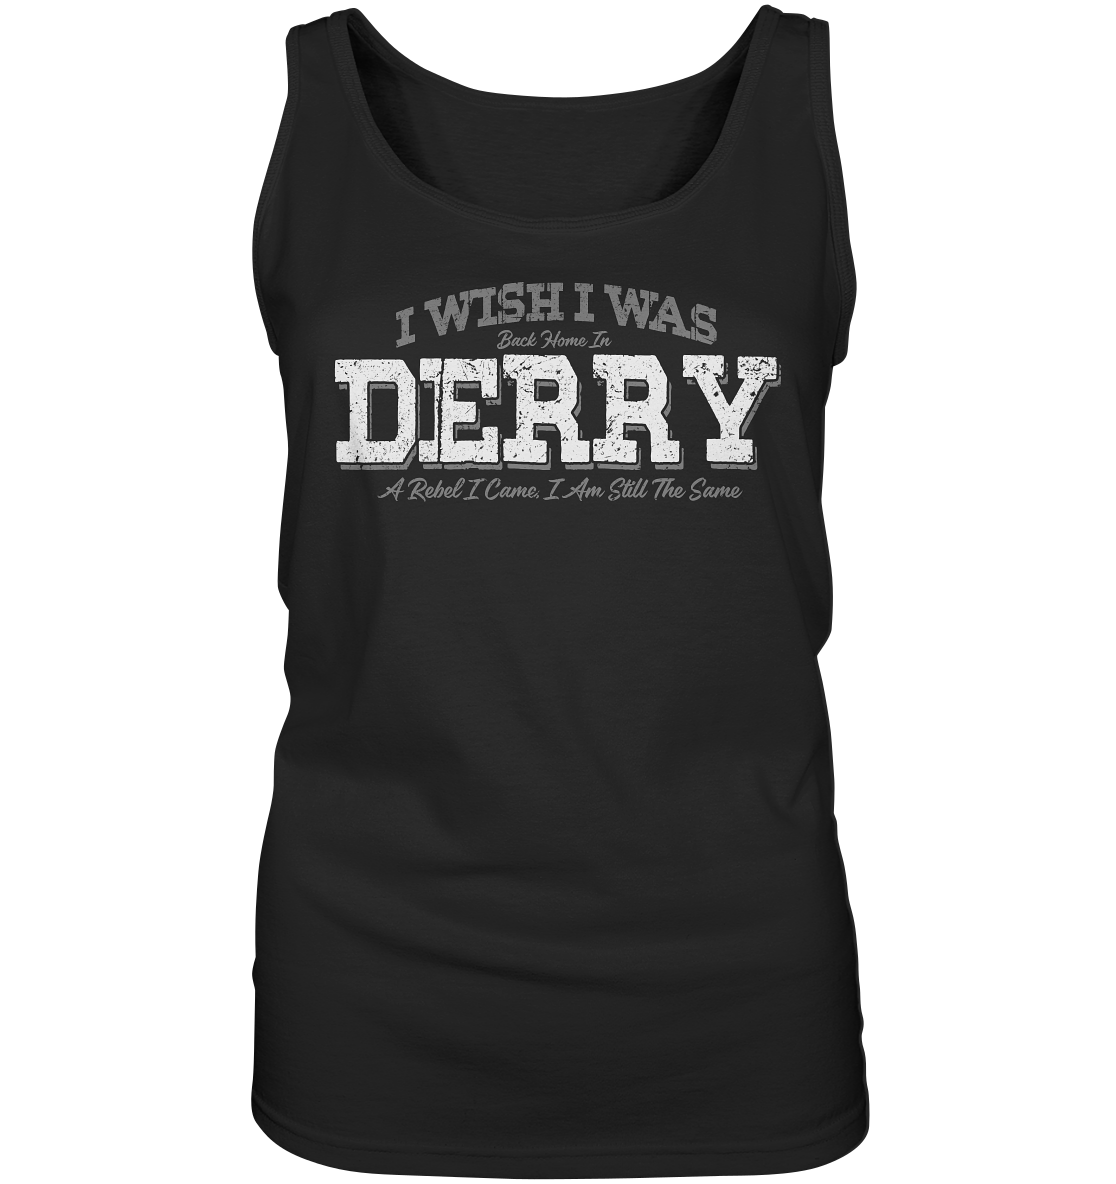 I Wish I Was Back Home In Derry - Ladies Tank-Top